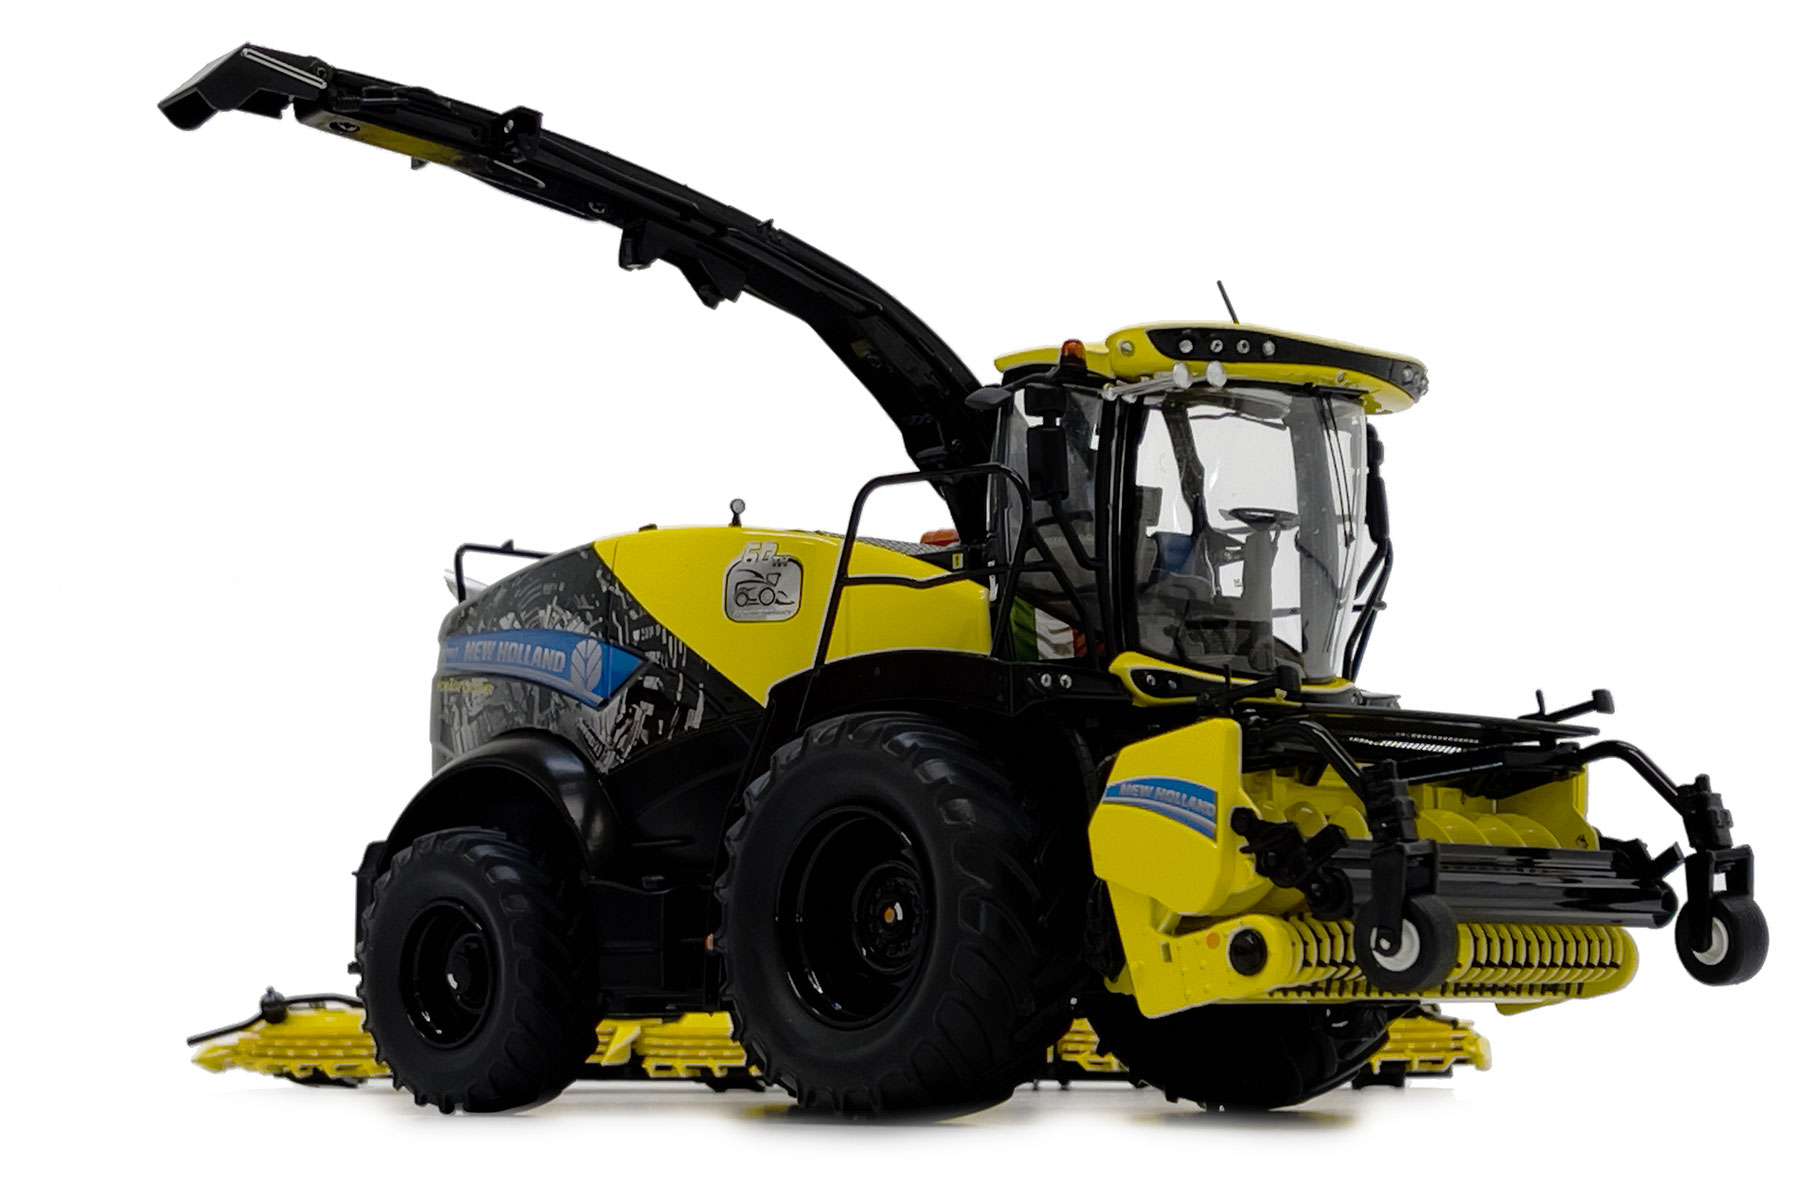 MarGe 2202-01 in 1:32, New Holland FR780 Harvester Demo Tour Italy edition, nur 333 Stück, NEU in OVP